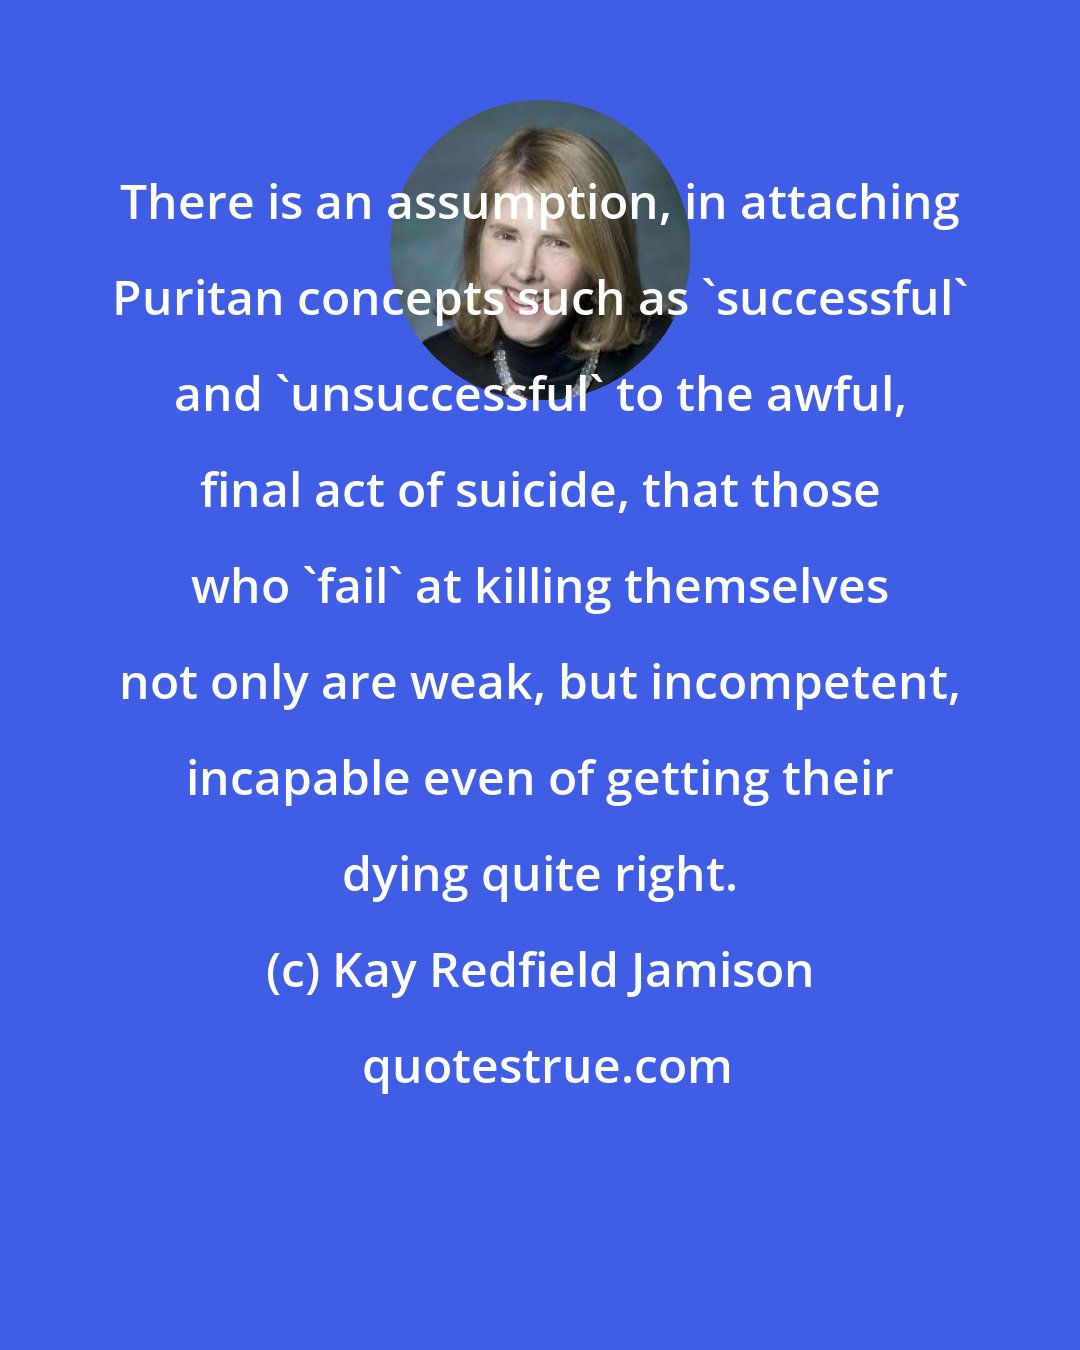 Kay Redfield Jamison: There is an assumption, in attaching Puritan concepts such as 'successful' and 'unsuccessful' to the awful, final act of suicide, that those who 'fail' at killing themselves not only are weak, but incompetent, incapable even of getting their dying quite right.